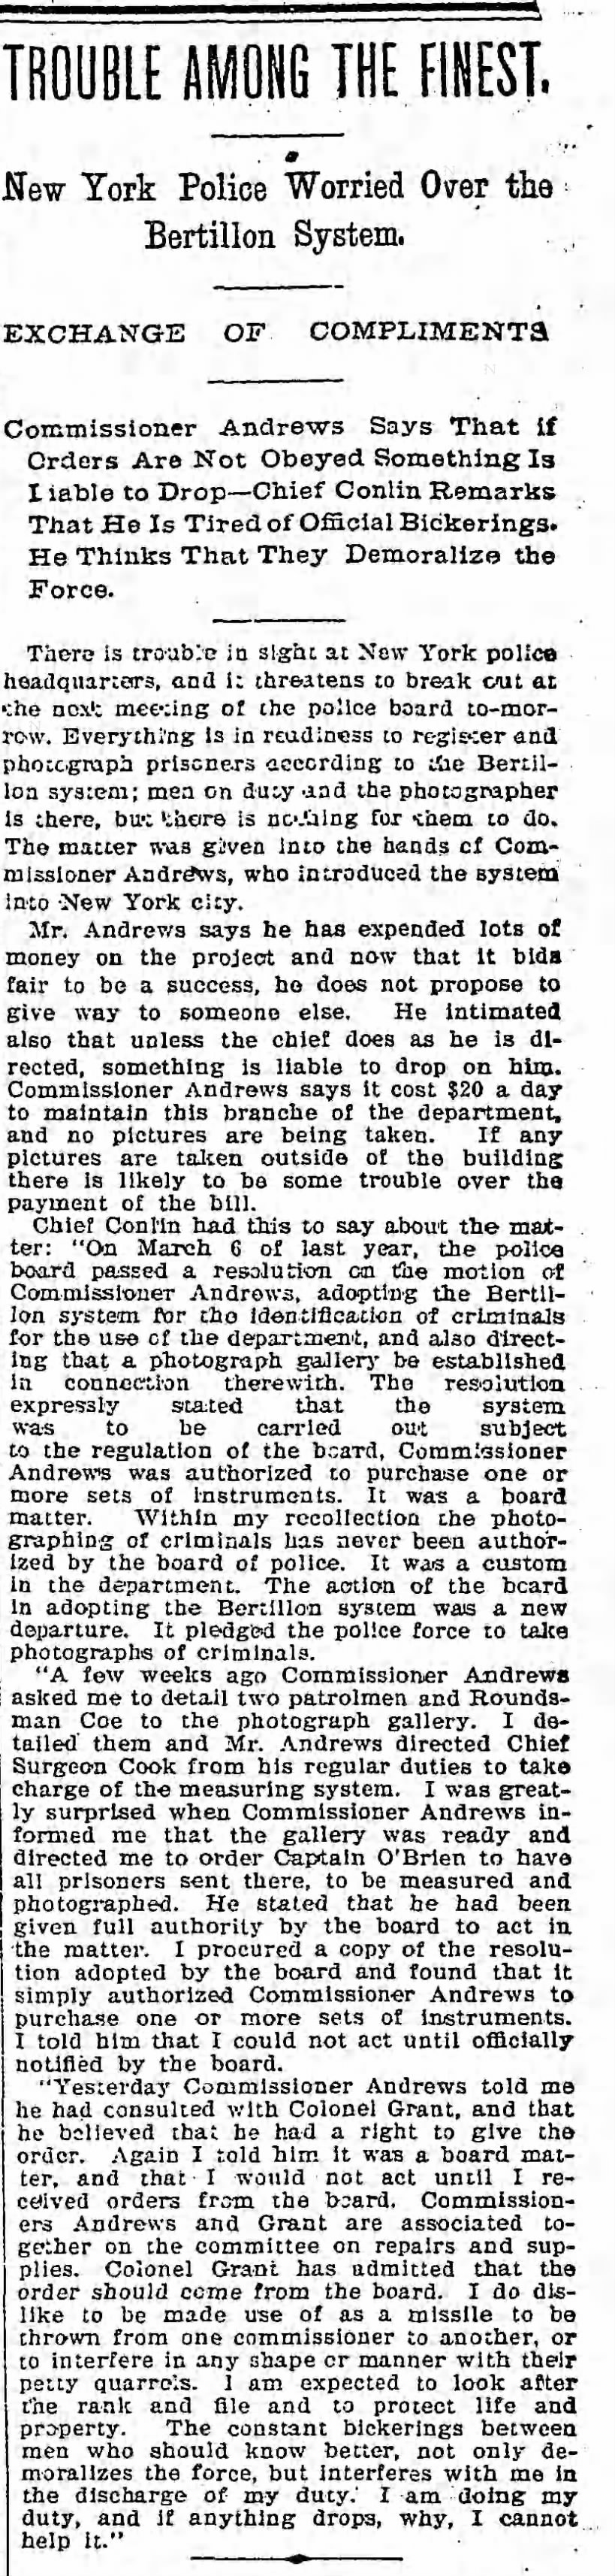 1897-02-16 NYPD Chief Objects re Bertillon Start-Up not Authorized by Board